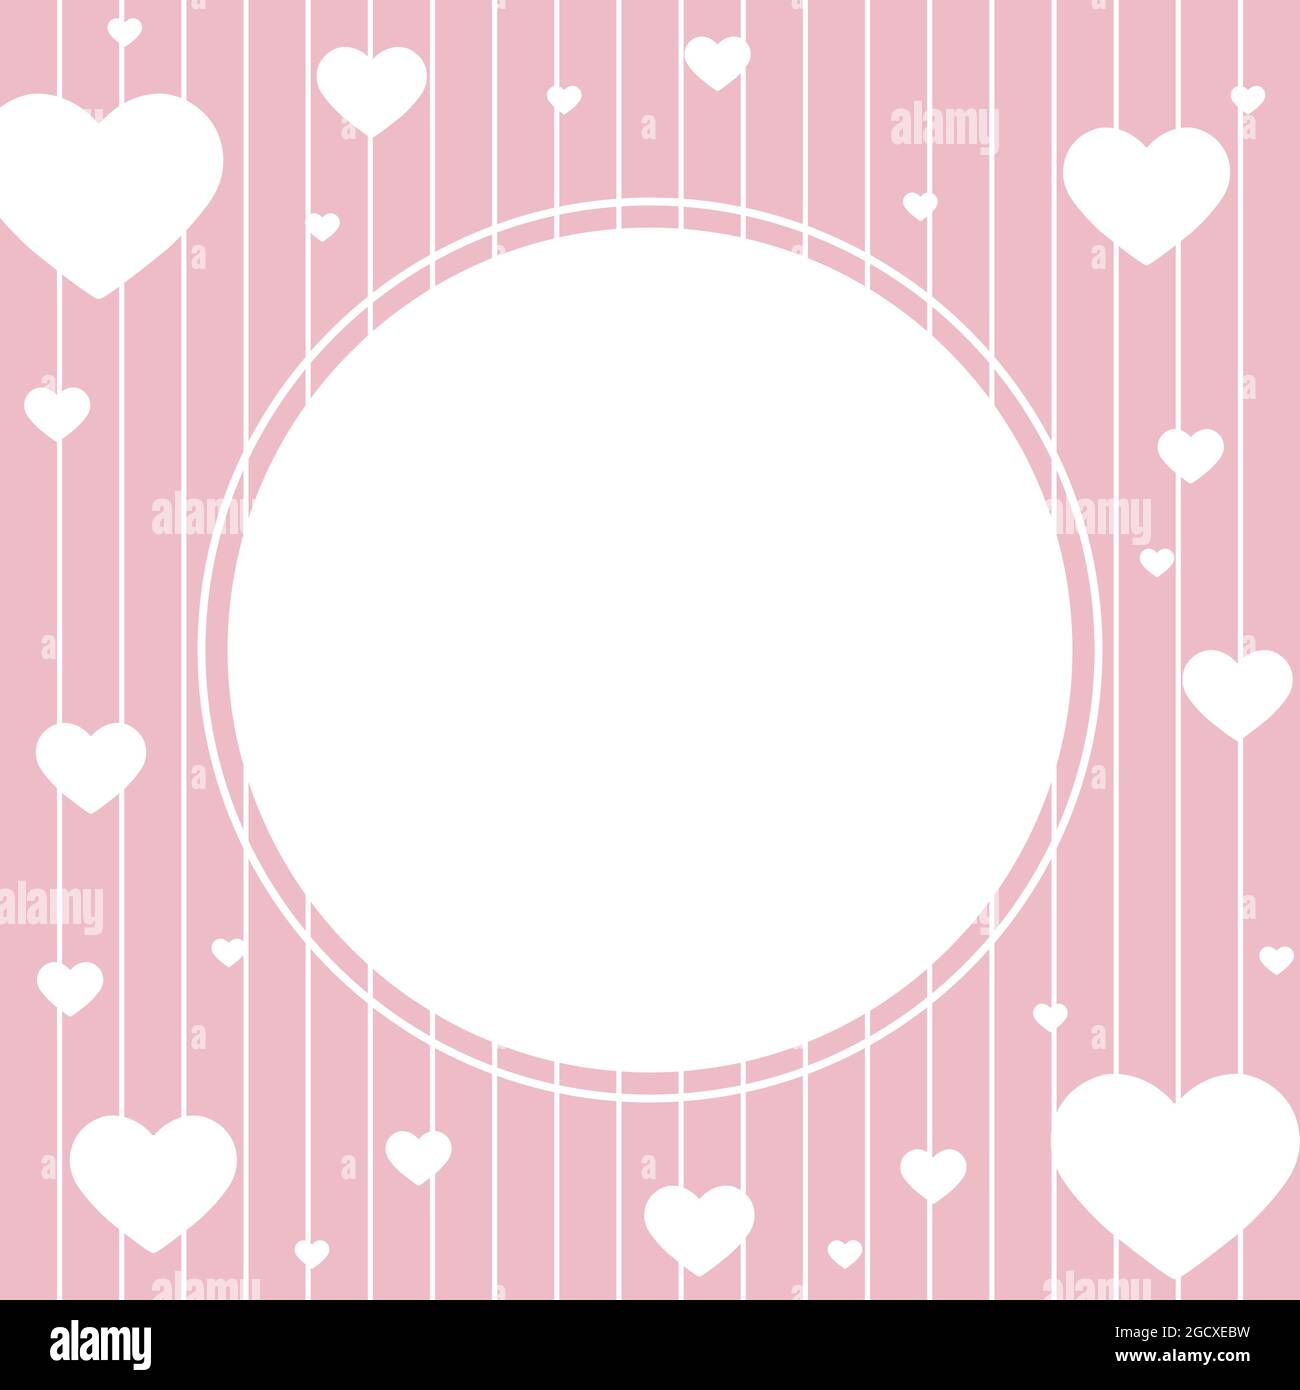 Background with a circle in the center for text, photography or illustration, and many different sized hearts for greetings, cards, banners and creati Stock Vector